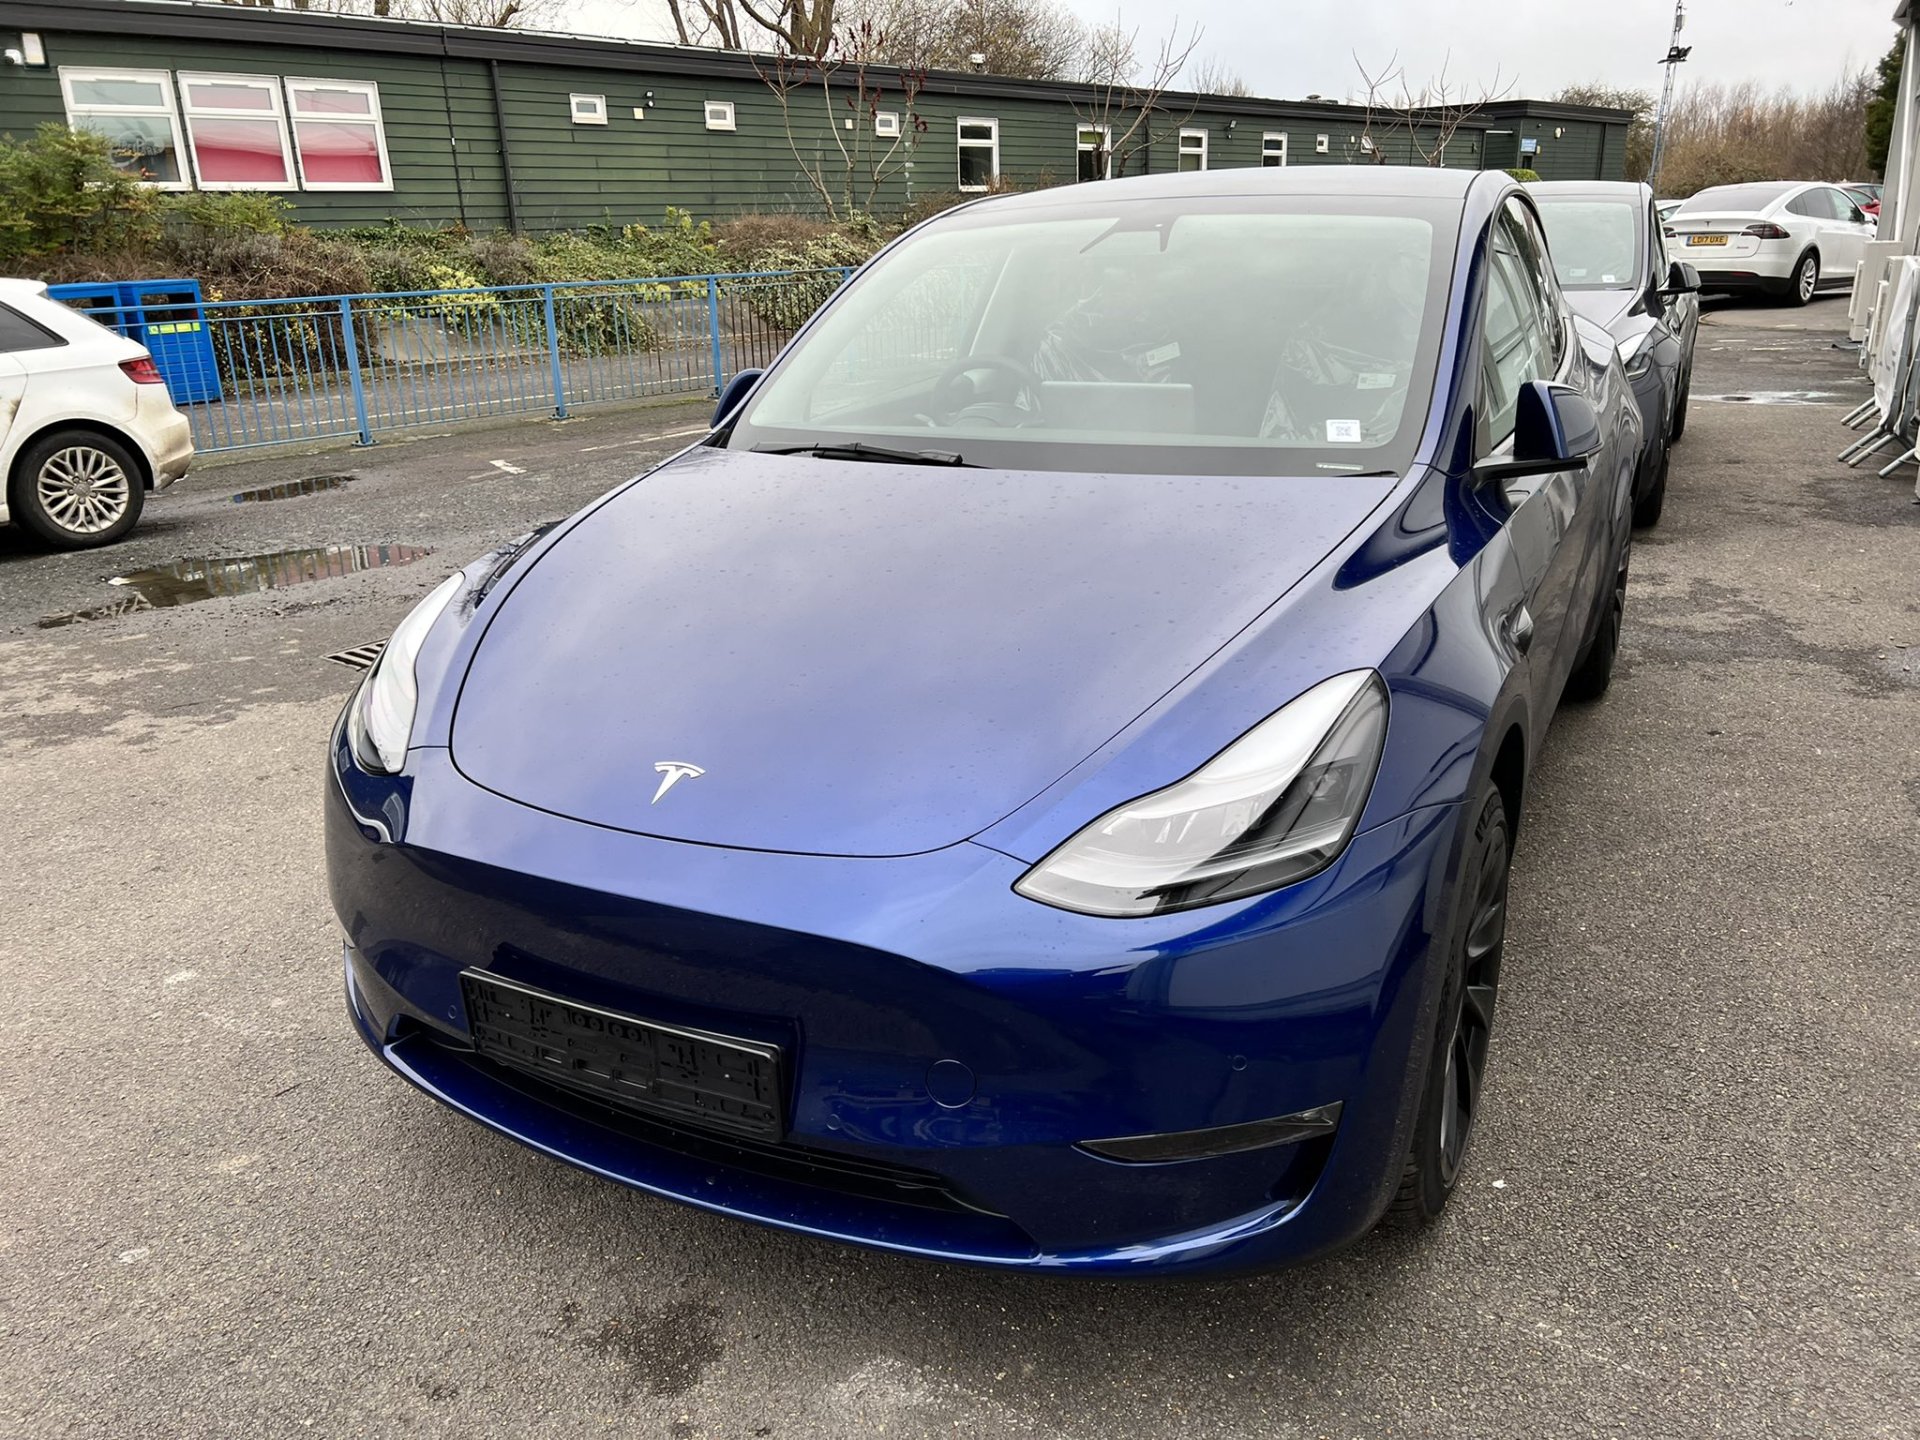 tesla model y arrives in the uk right hand models spotted in the wild